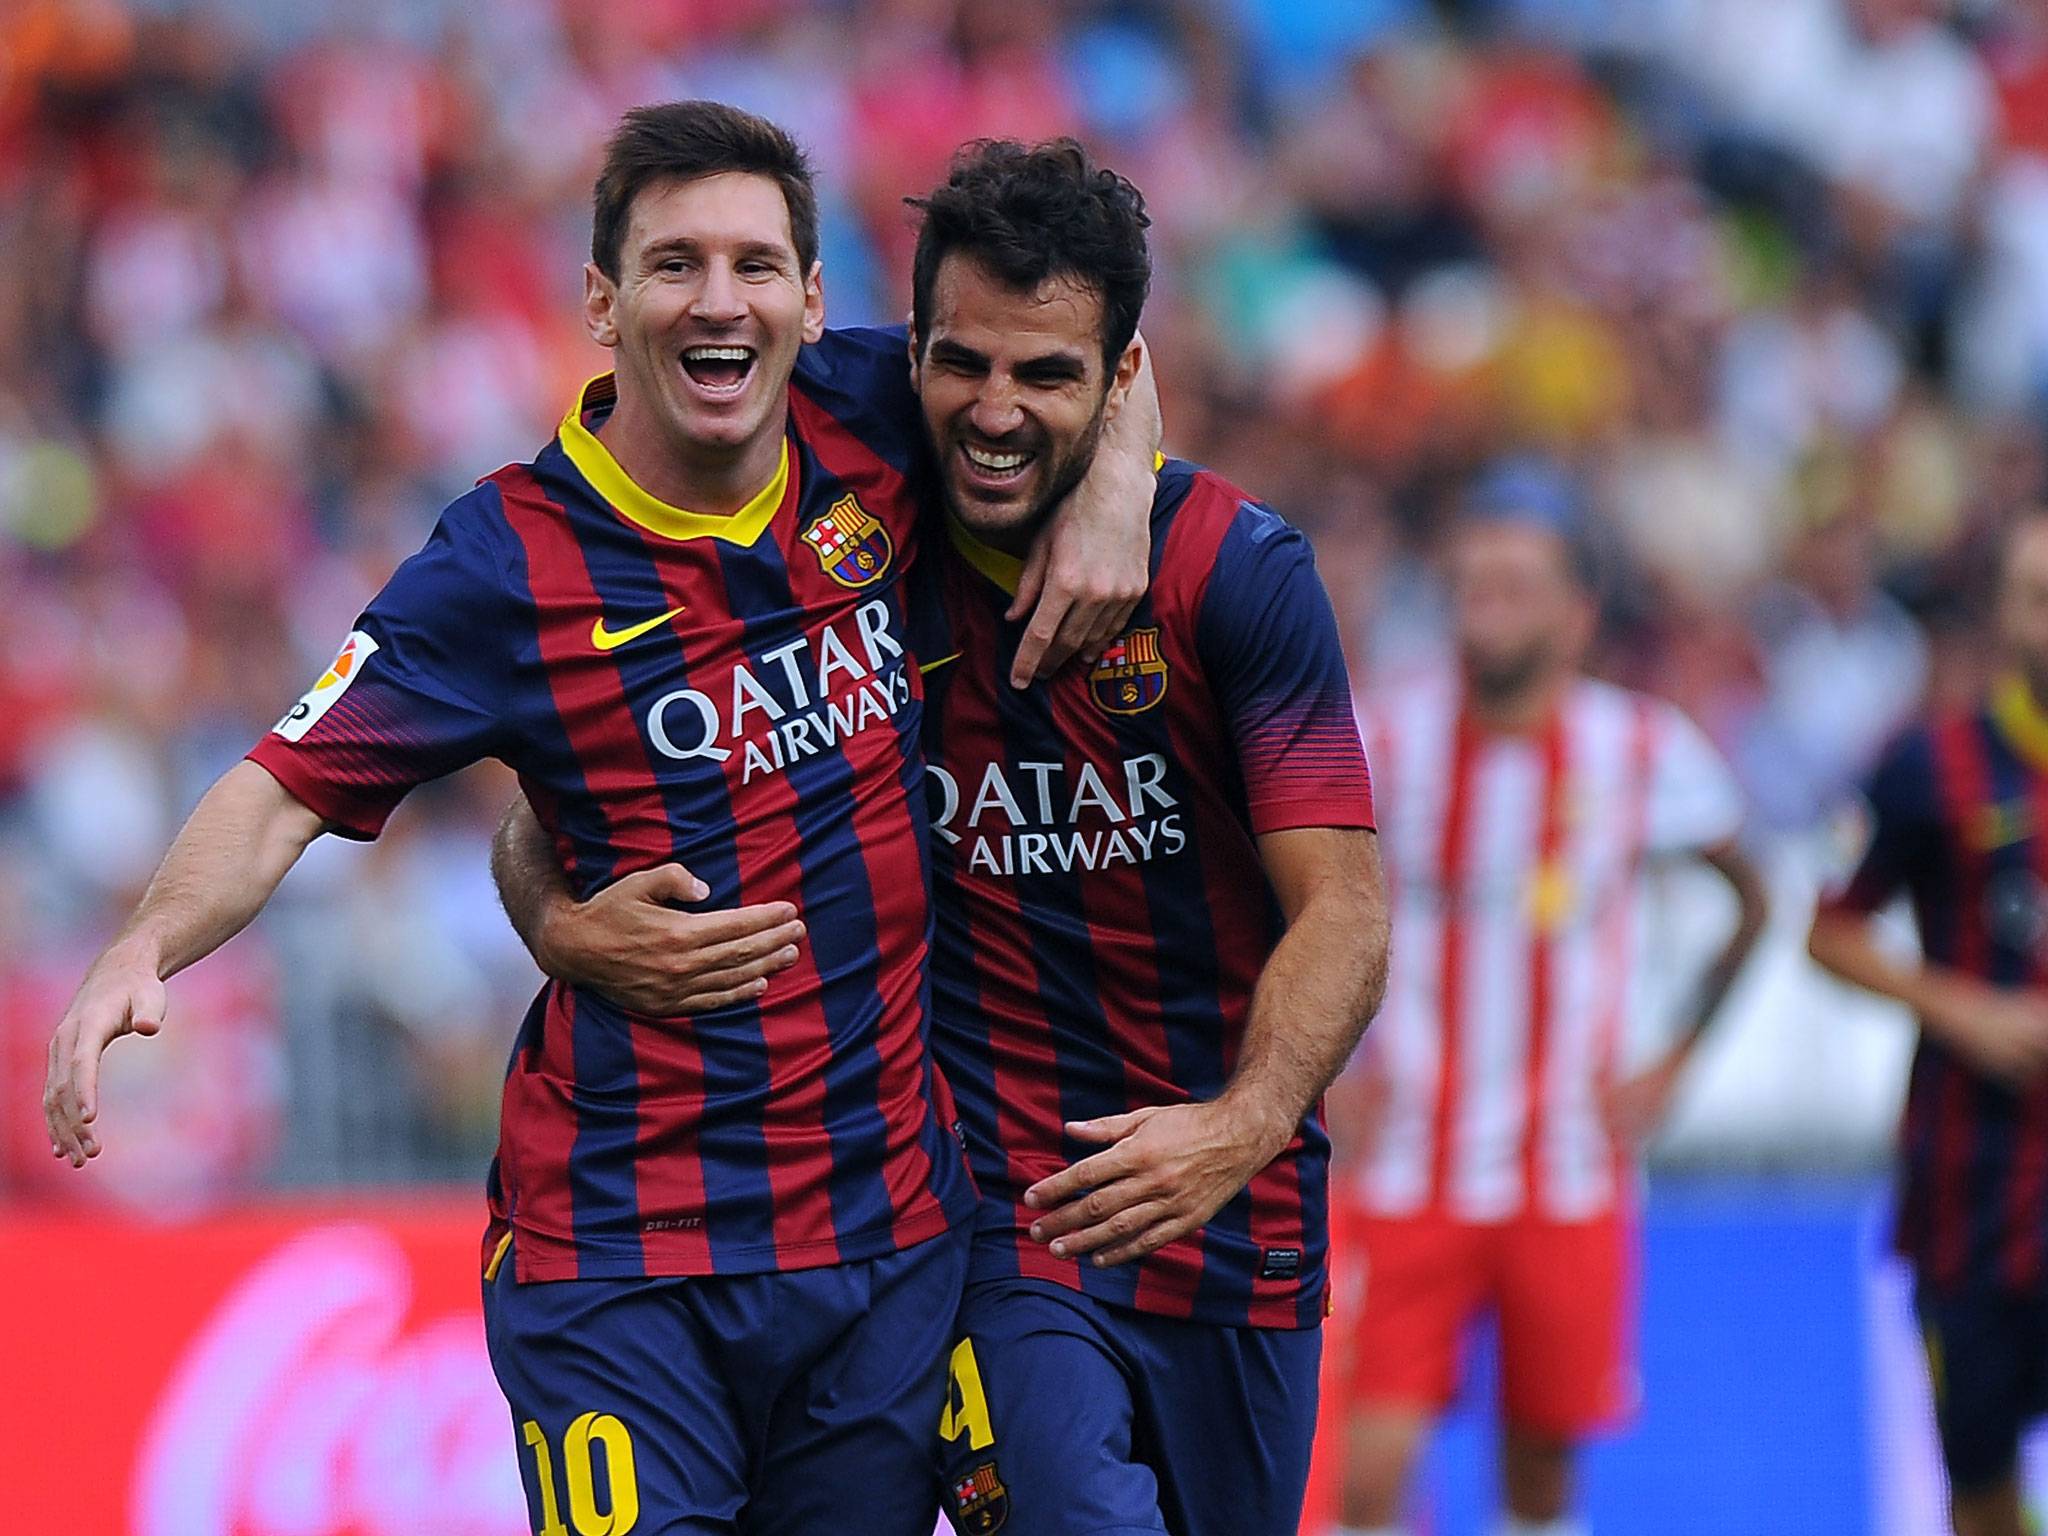 The football players of Barcelona Francesc Fabregas and Lionel